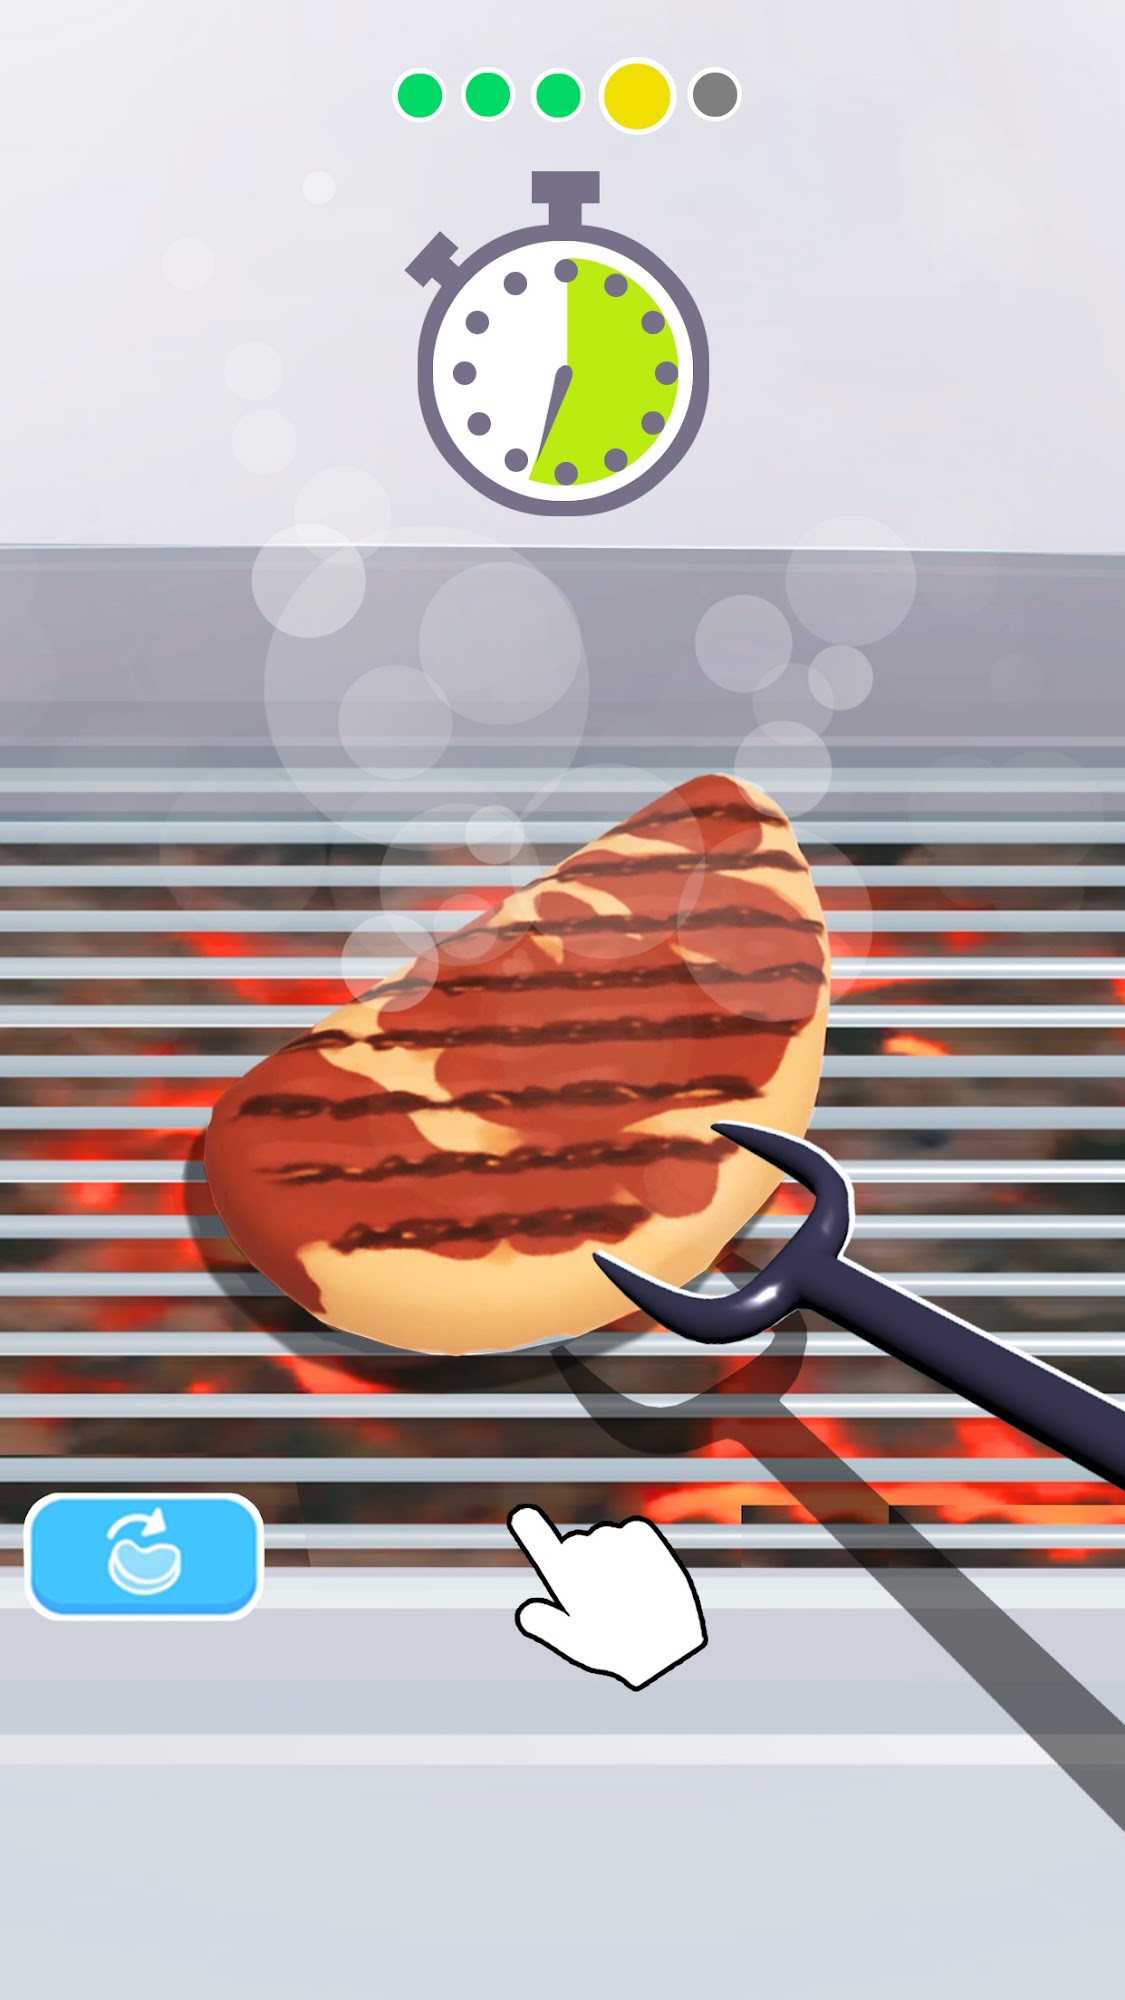 King of Steaks - ASMR Cooking - Android game screenshots.